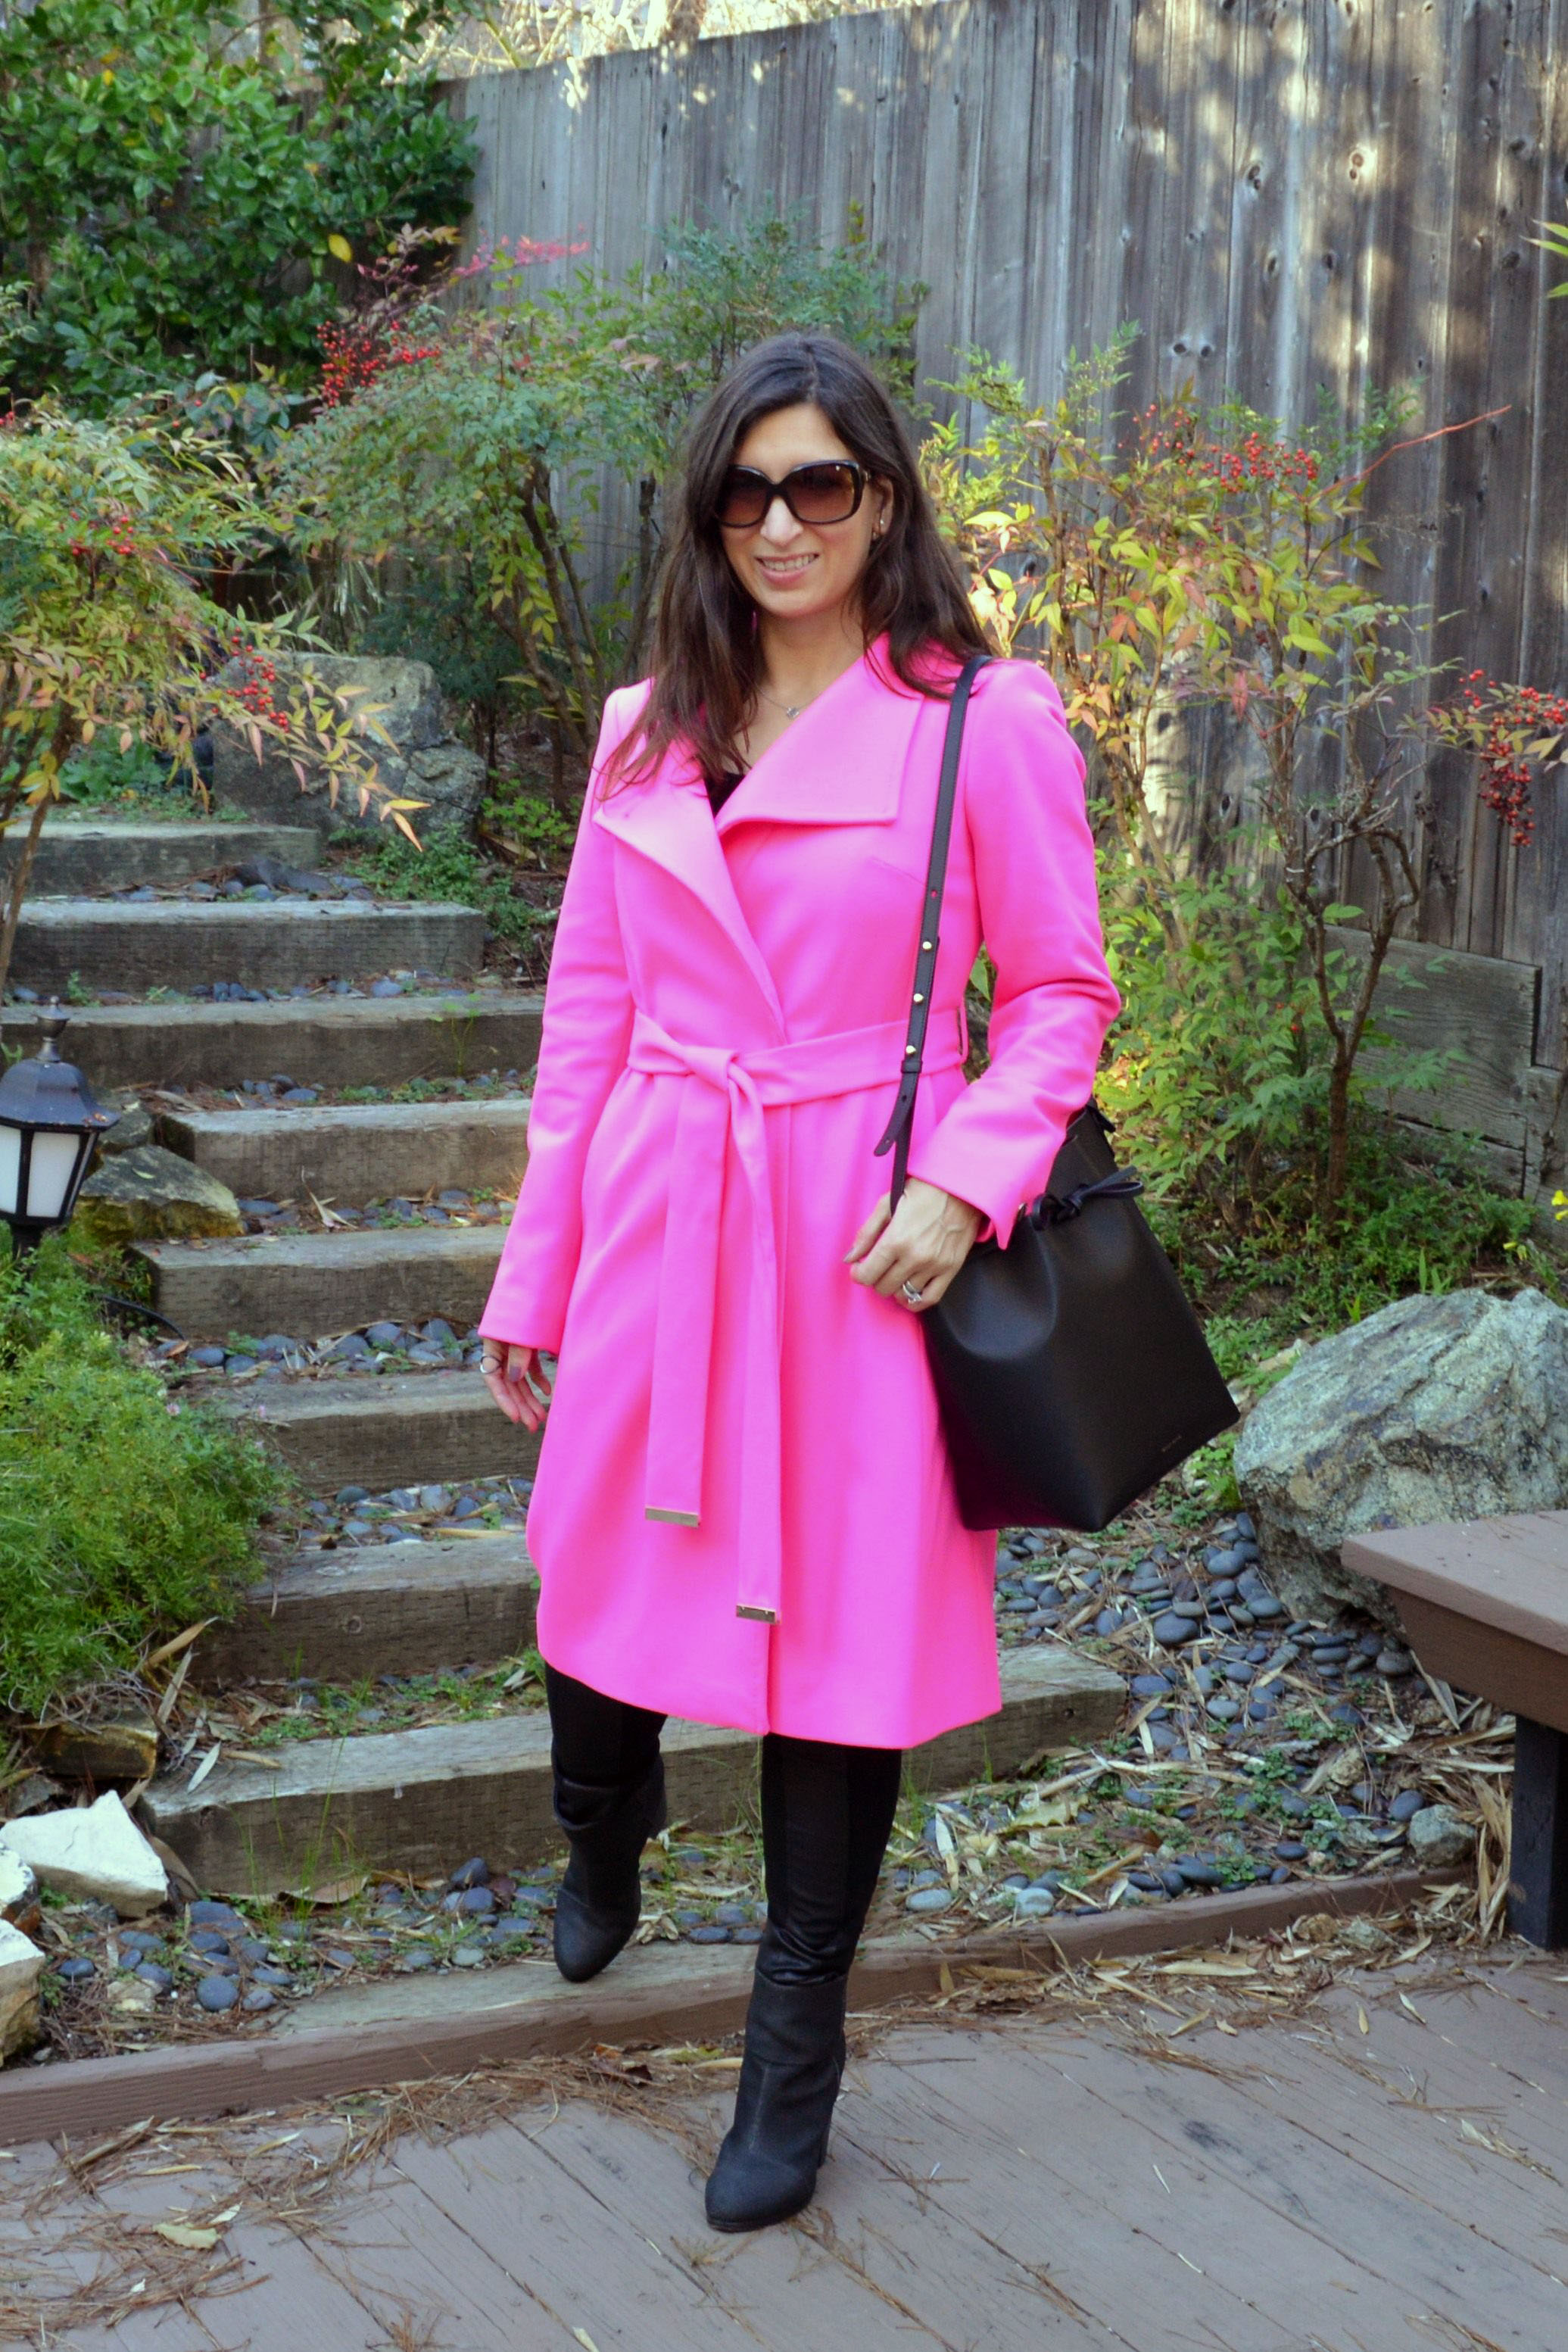 The pink coat – Bay Area Fashionista